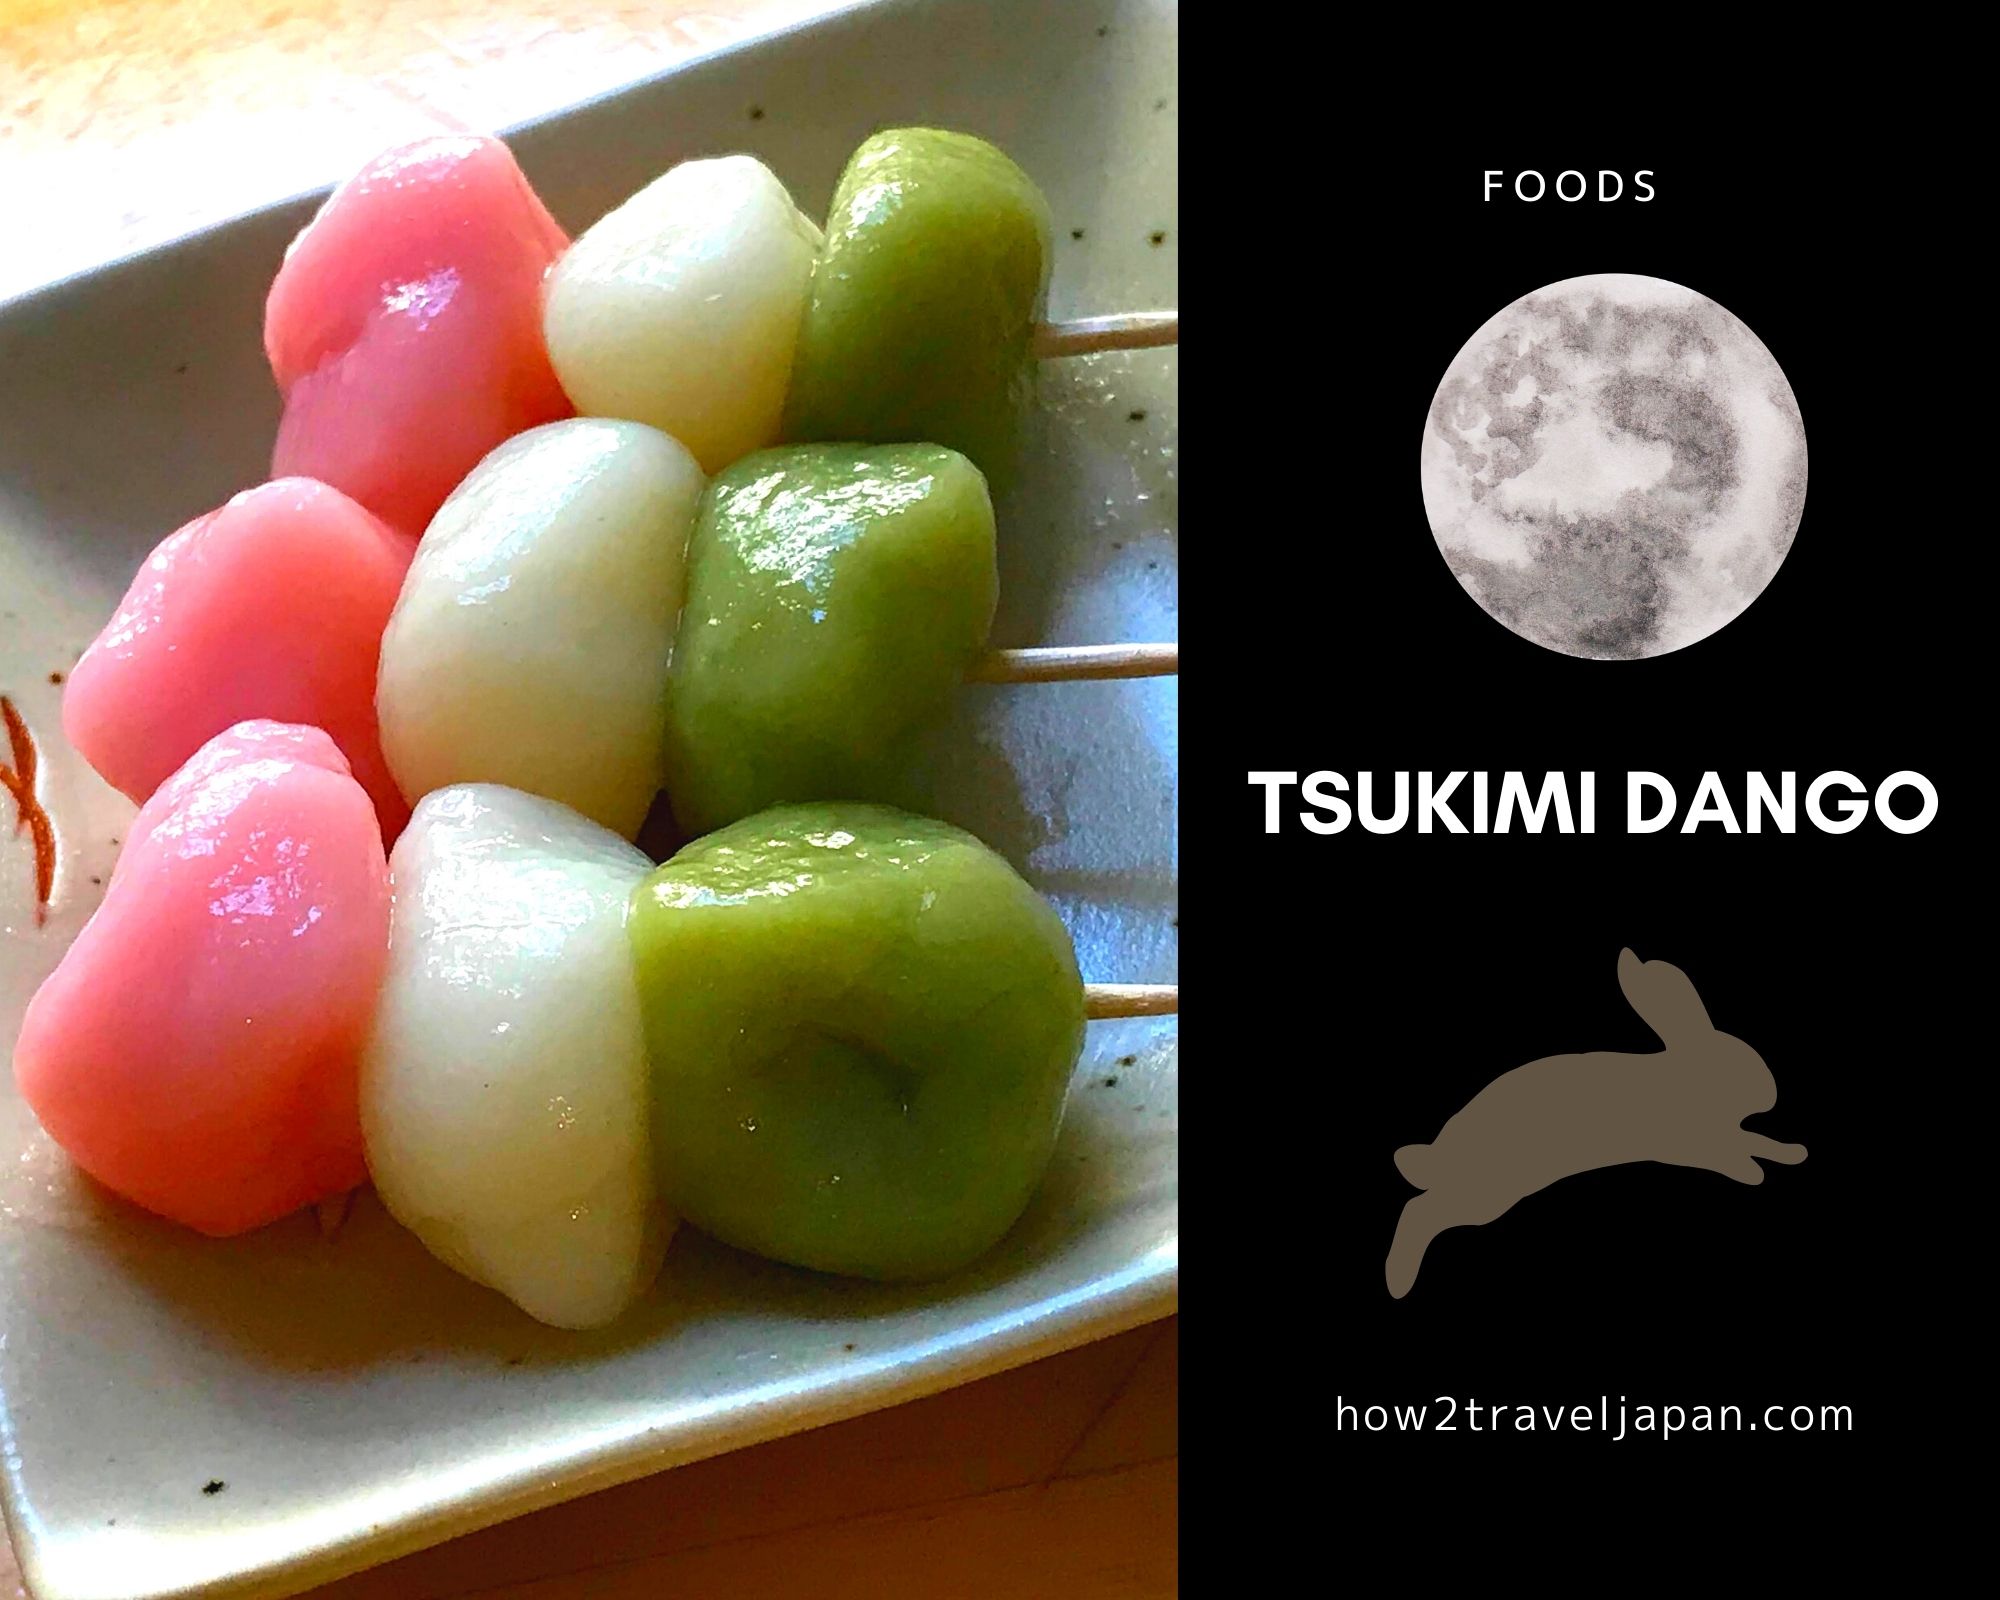 You are currently viewing Tsukimi dango, food for viewing the full moon